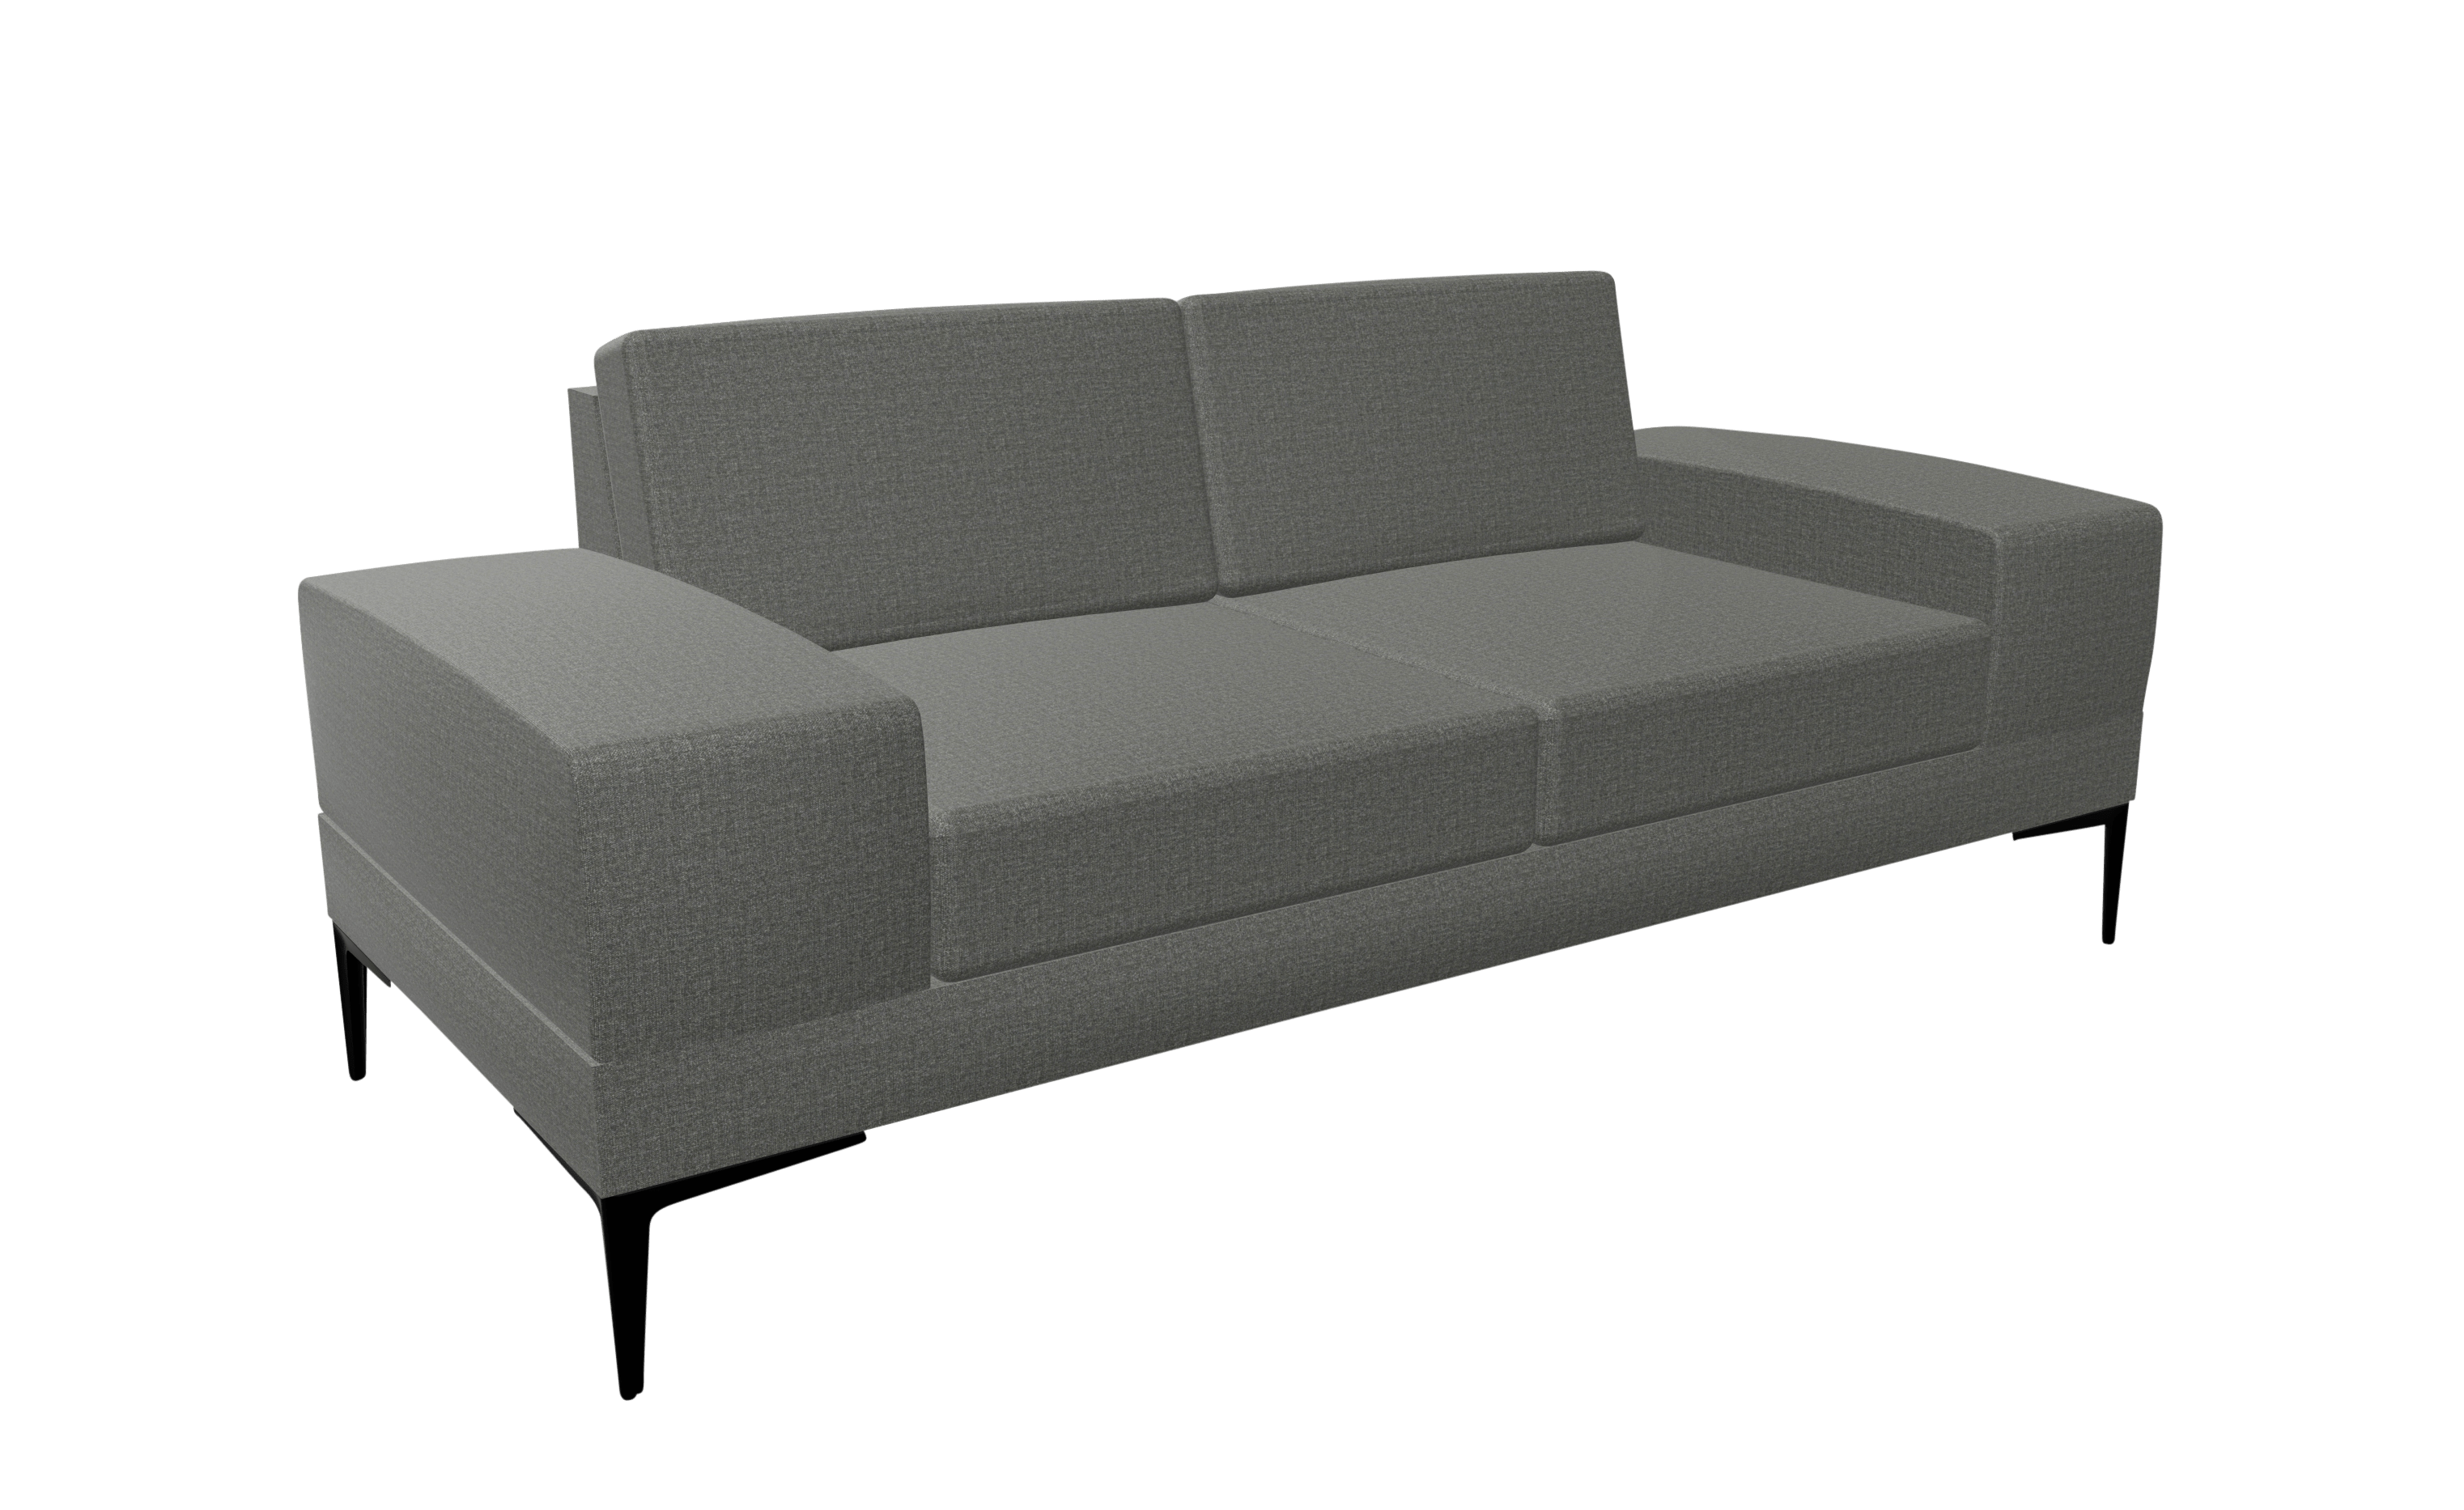 A grey office sofa with black legs .